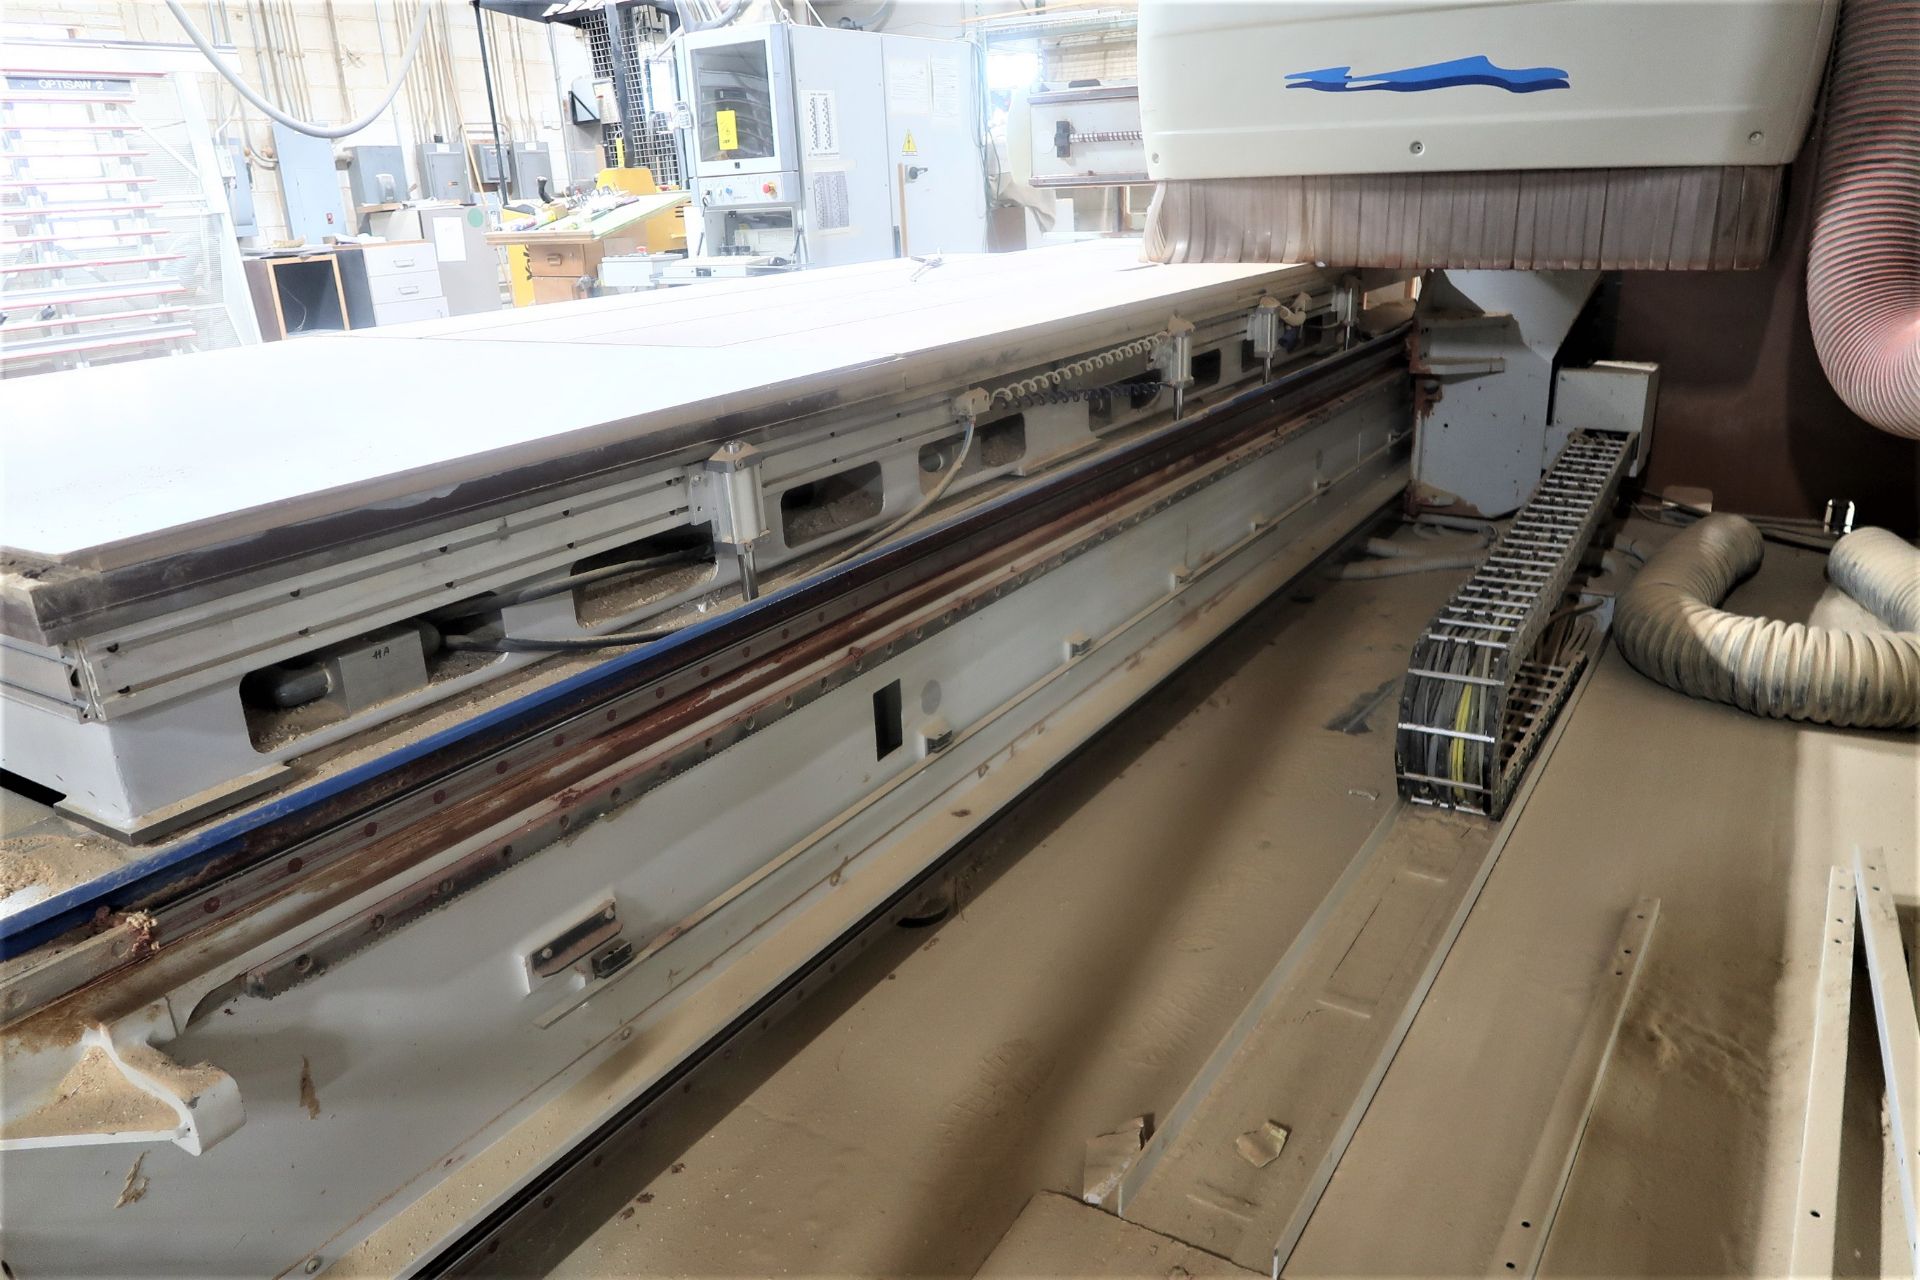 5'x12' Busellato Model Jet4 WF Xl CNC Fixed Table Moving Gantry Router, S/N 5088, New 2004 - Image 7 of 11